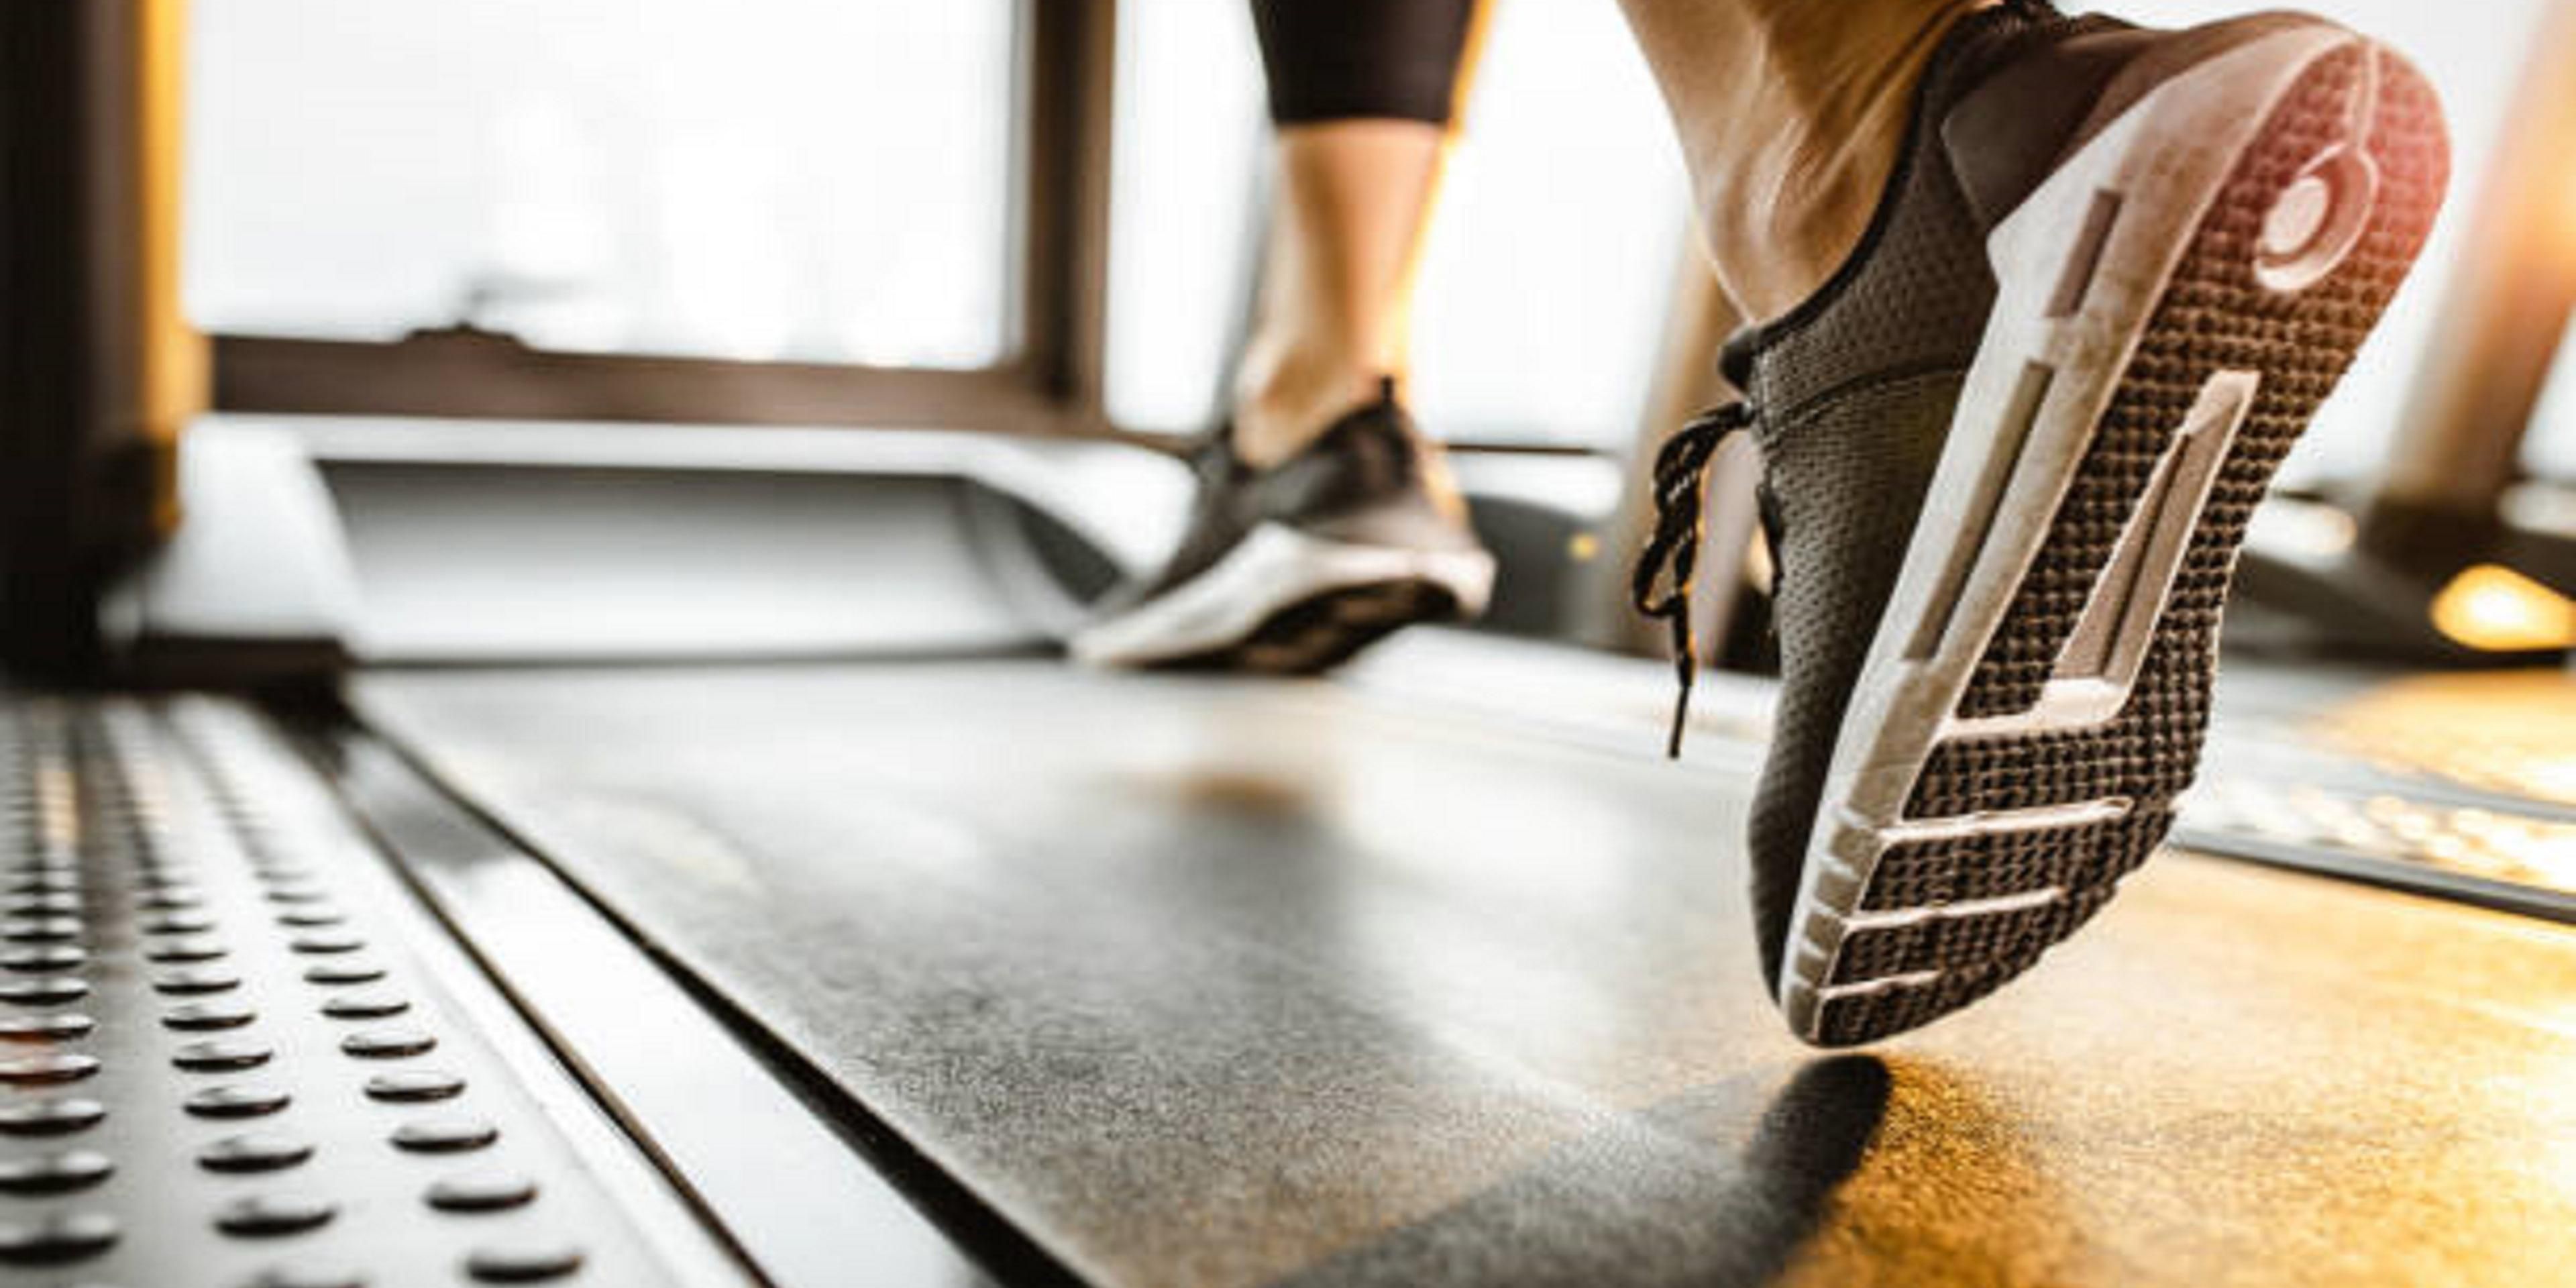 Get your sweat on in our complimentary, fully equipped fitness center with equipment, bike elliptical treadmill and free weights open 24 hours.